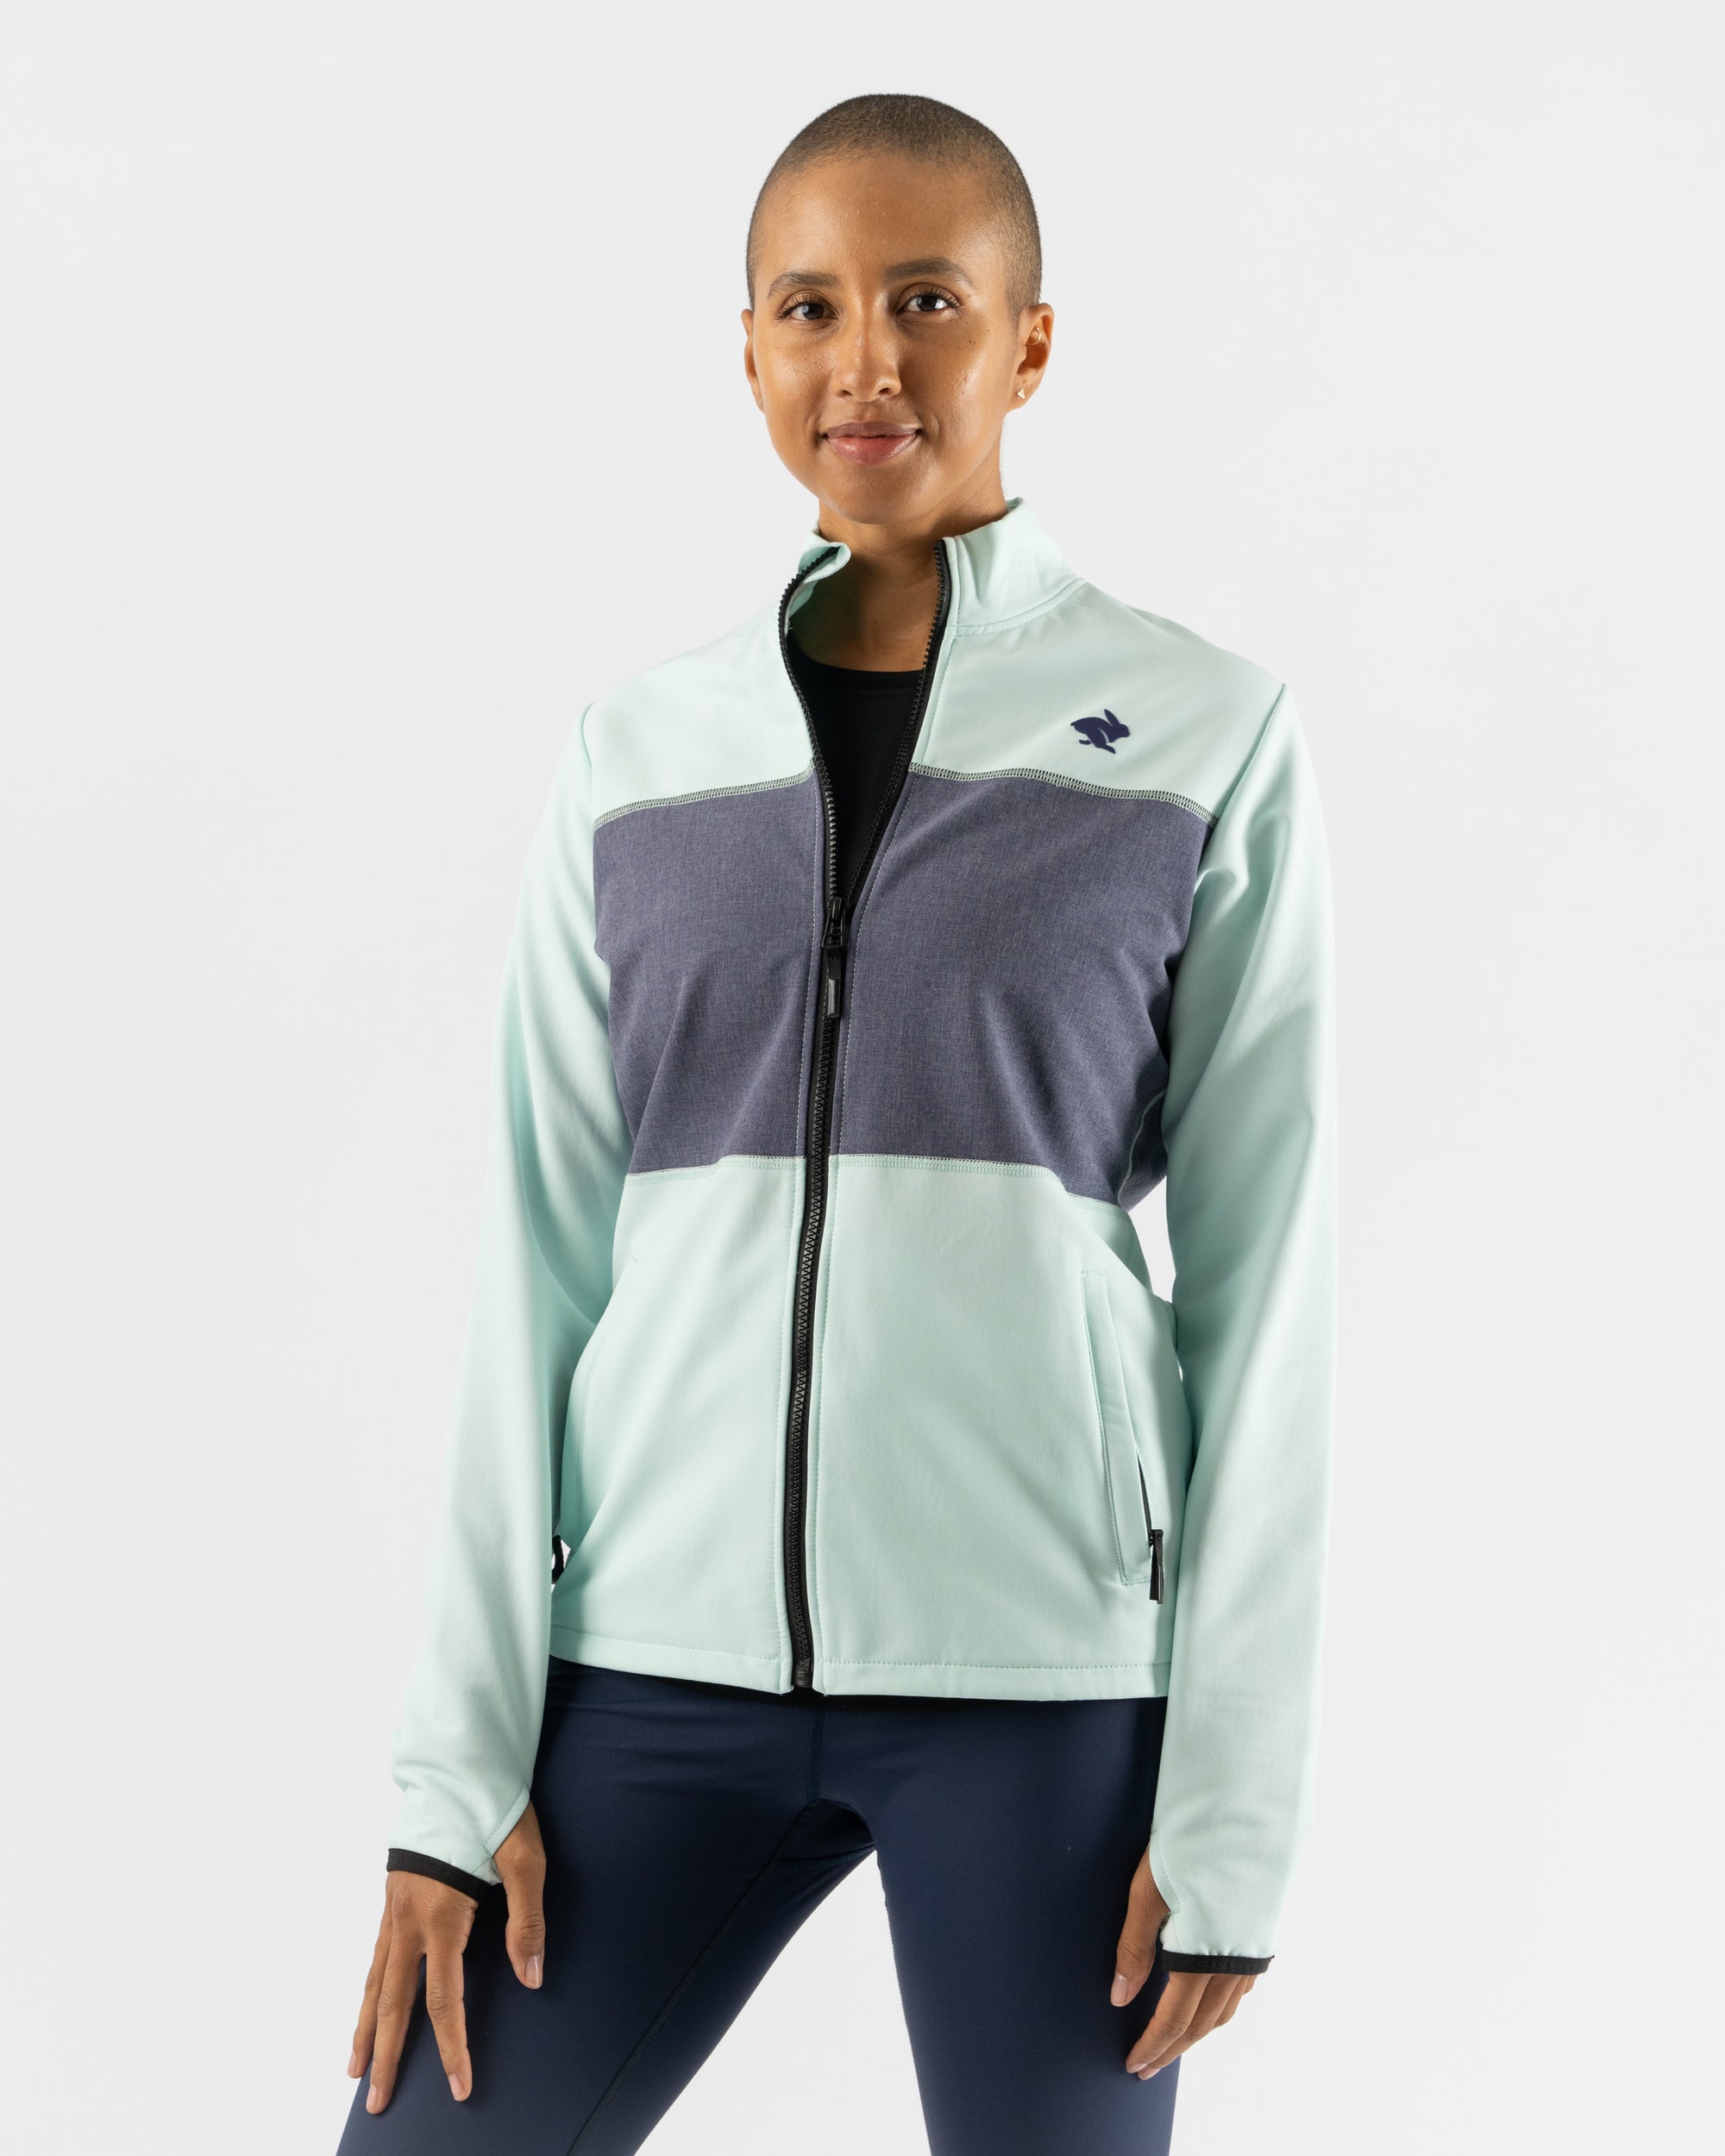 Cold Weather Running Gear - Defroster - rabbit